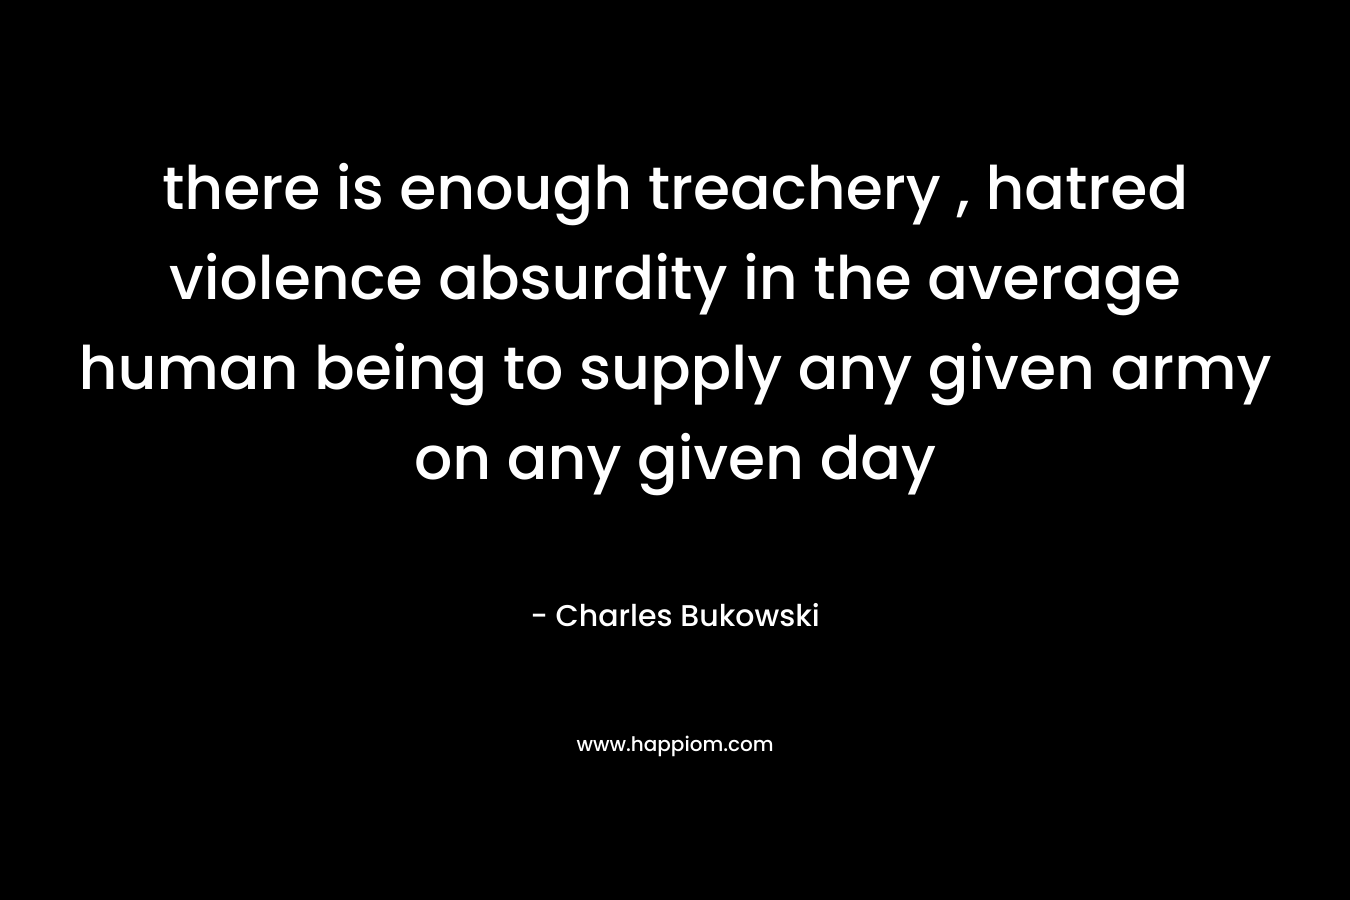 there is enough treachery , hatred violence absurdity in the average human being to supply any given army on any given day